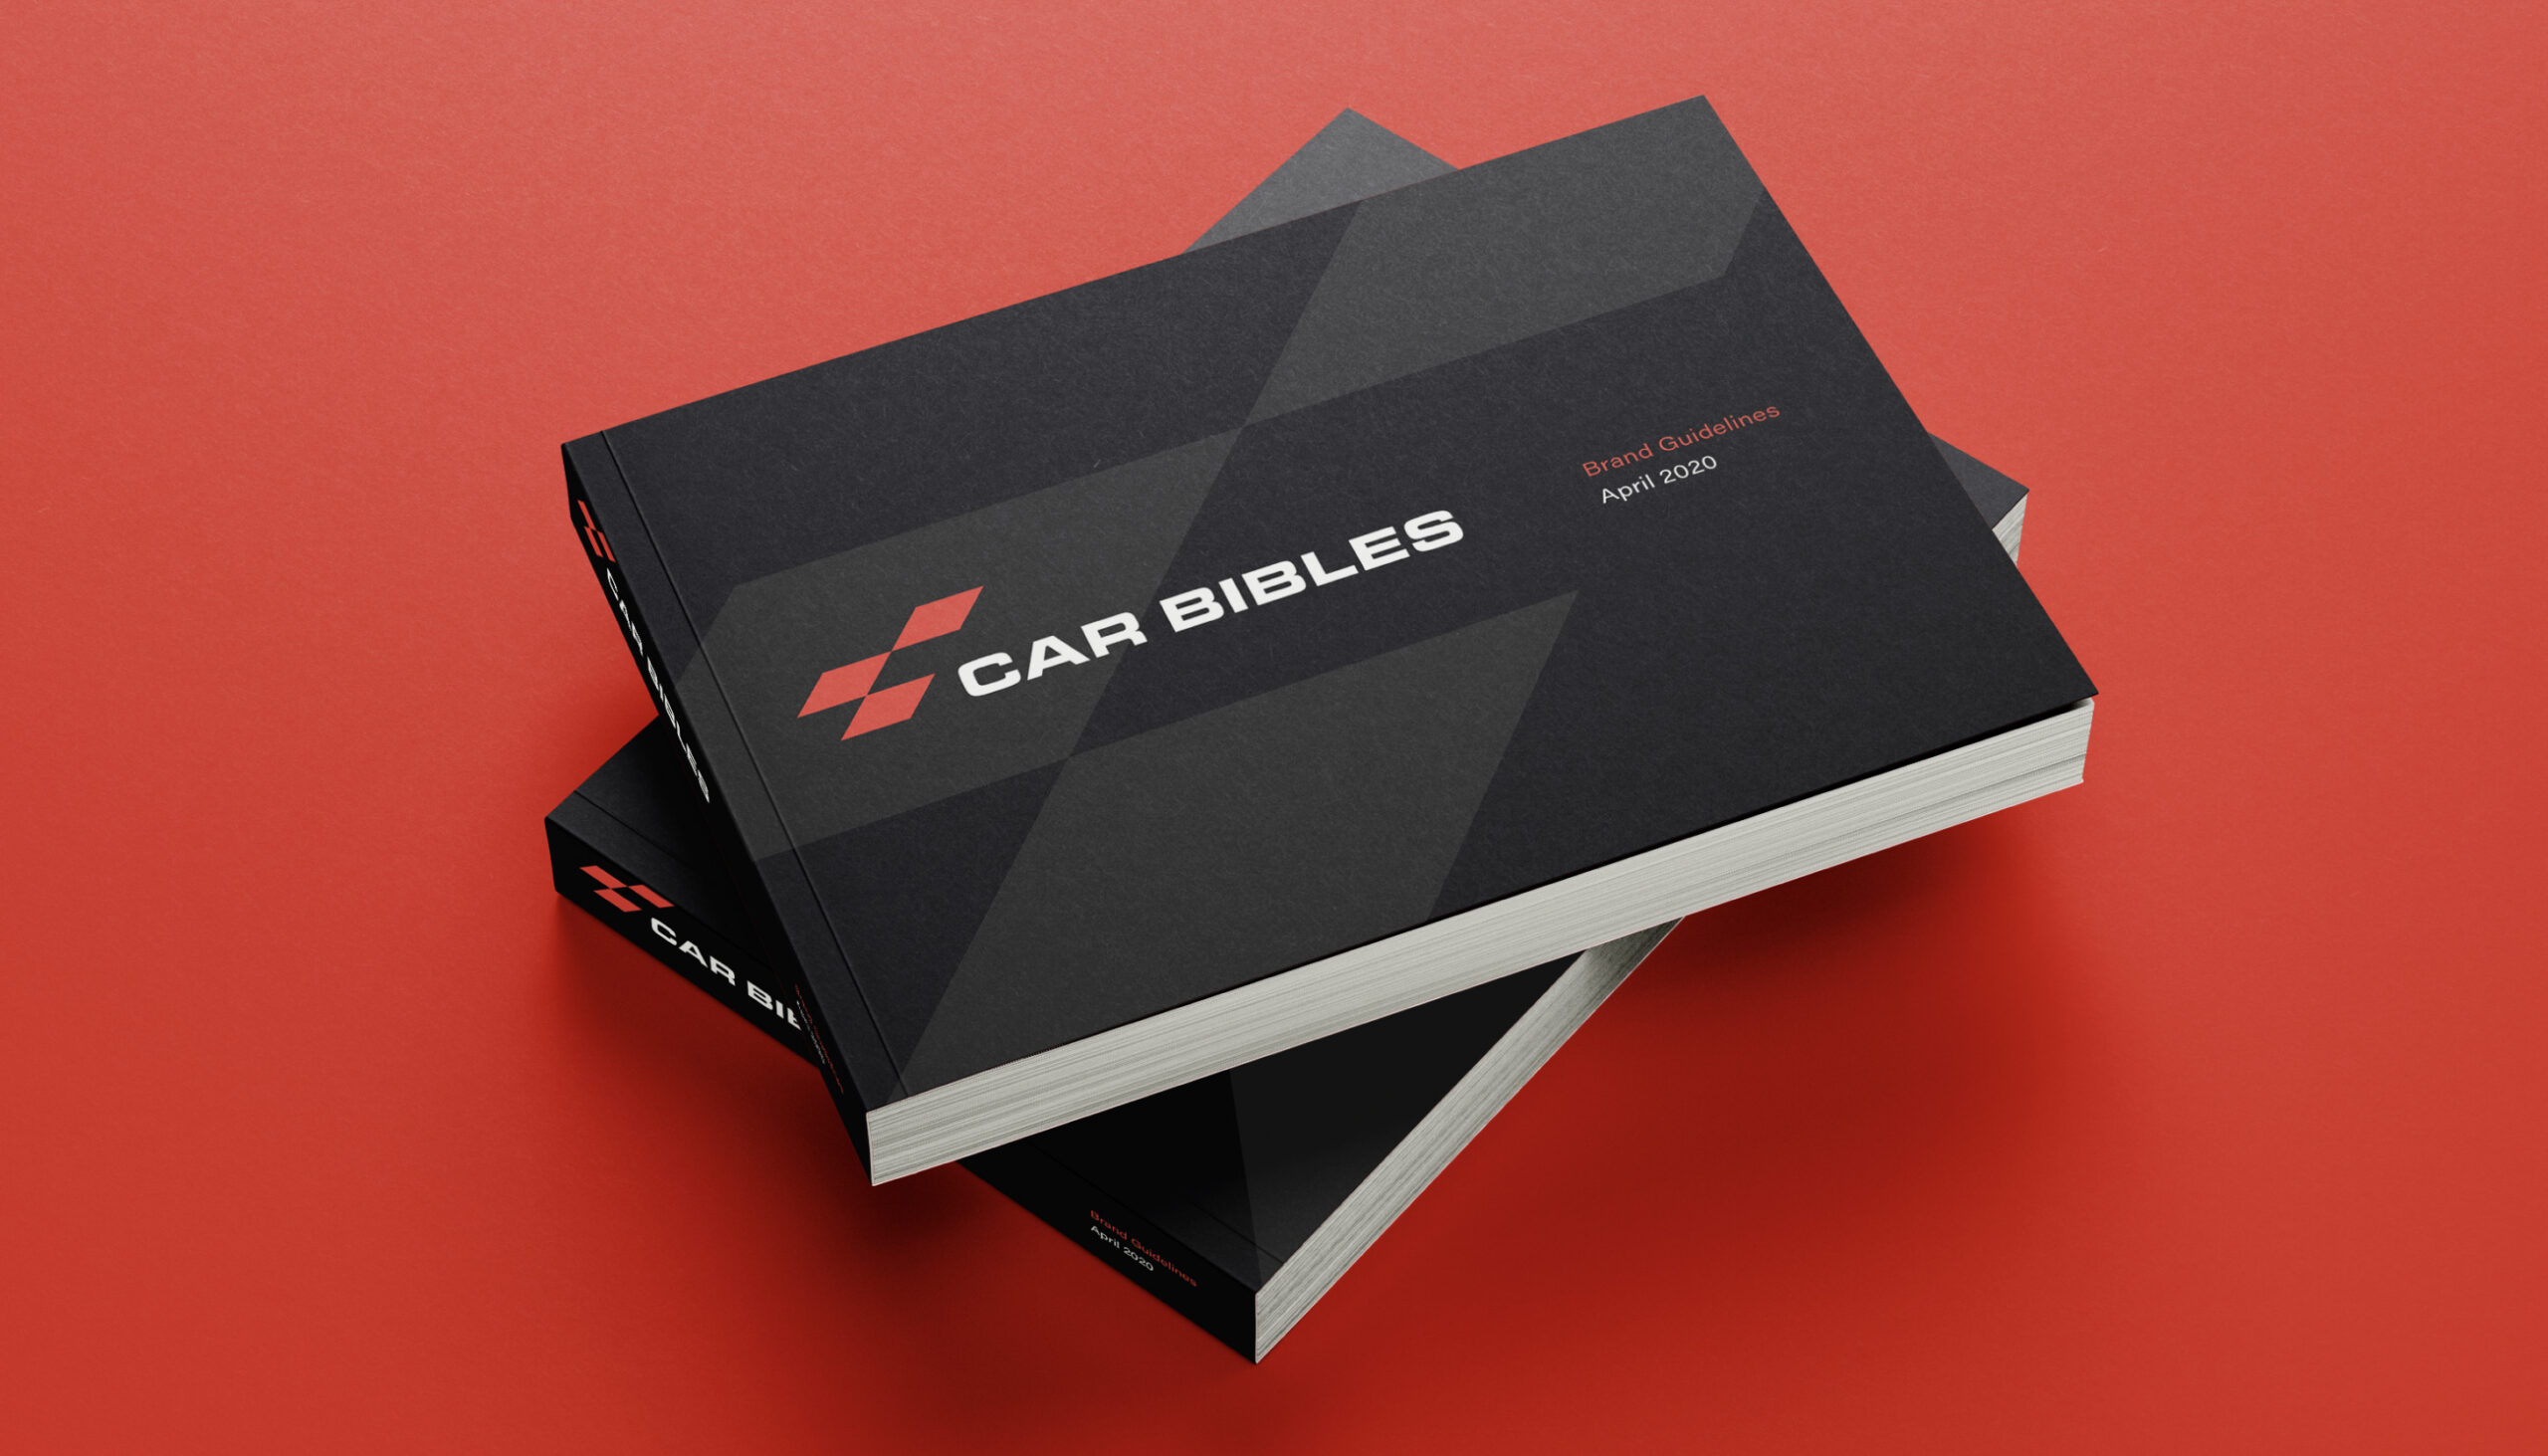 carbibles_casestudy-11